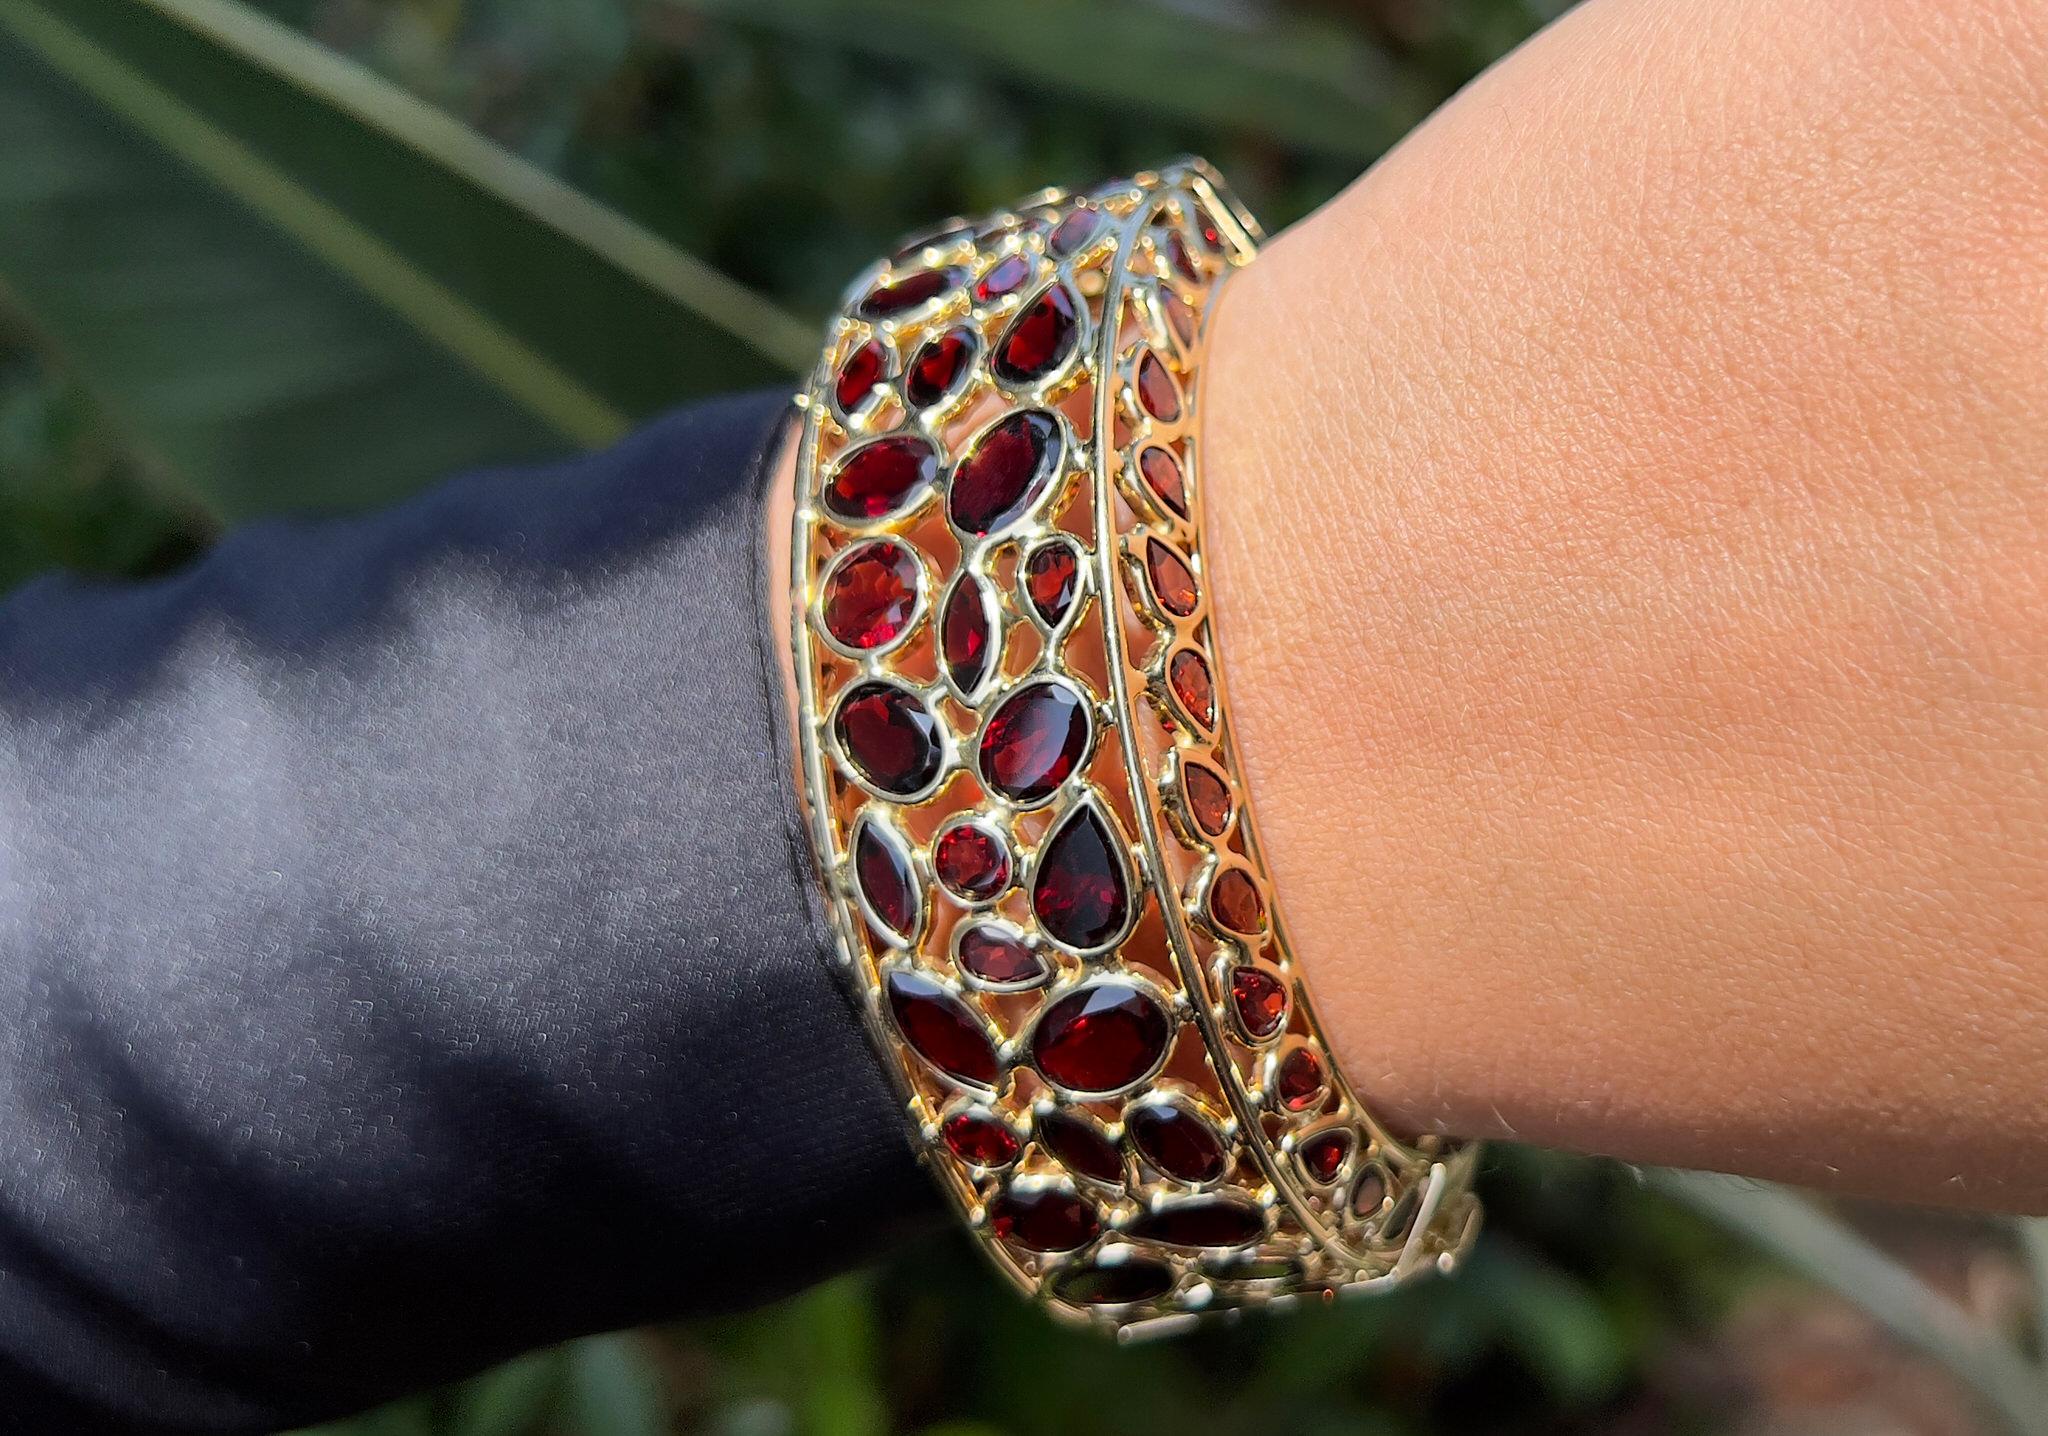 Important Cougar Bangle Bracelet Red Garnets 100 Carats 14K Yellow Gold In Excellent Condition For Sale In Laguna Niguel, CA